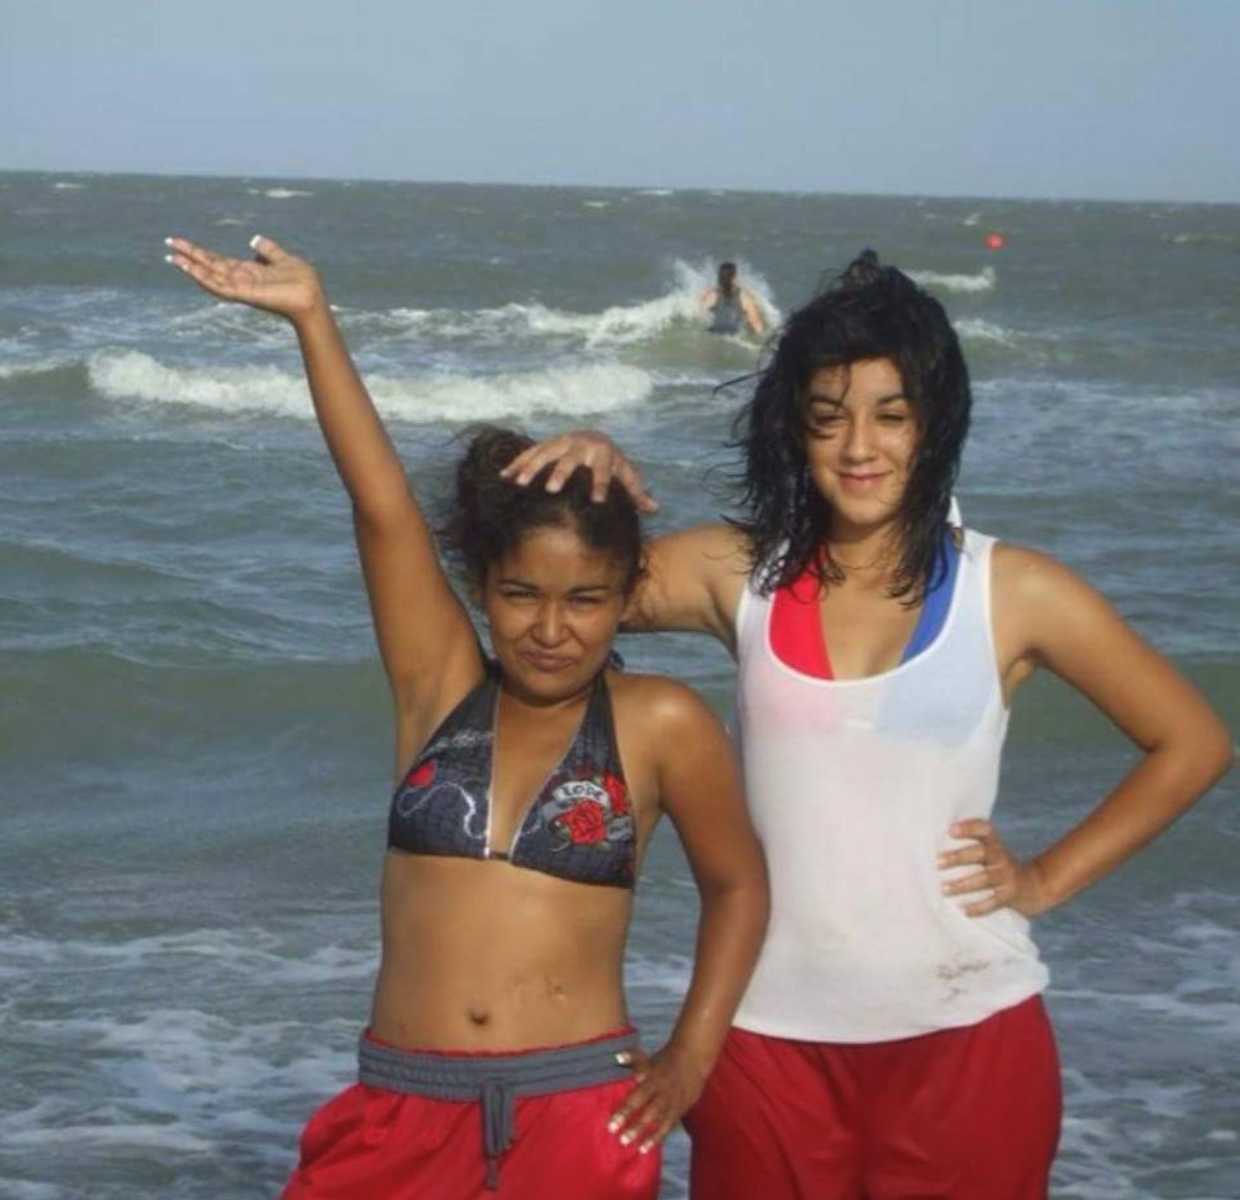 Older sister with kidney issues who would soon pass away stands with hand on little sister's head at beach